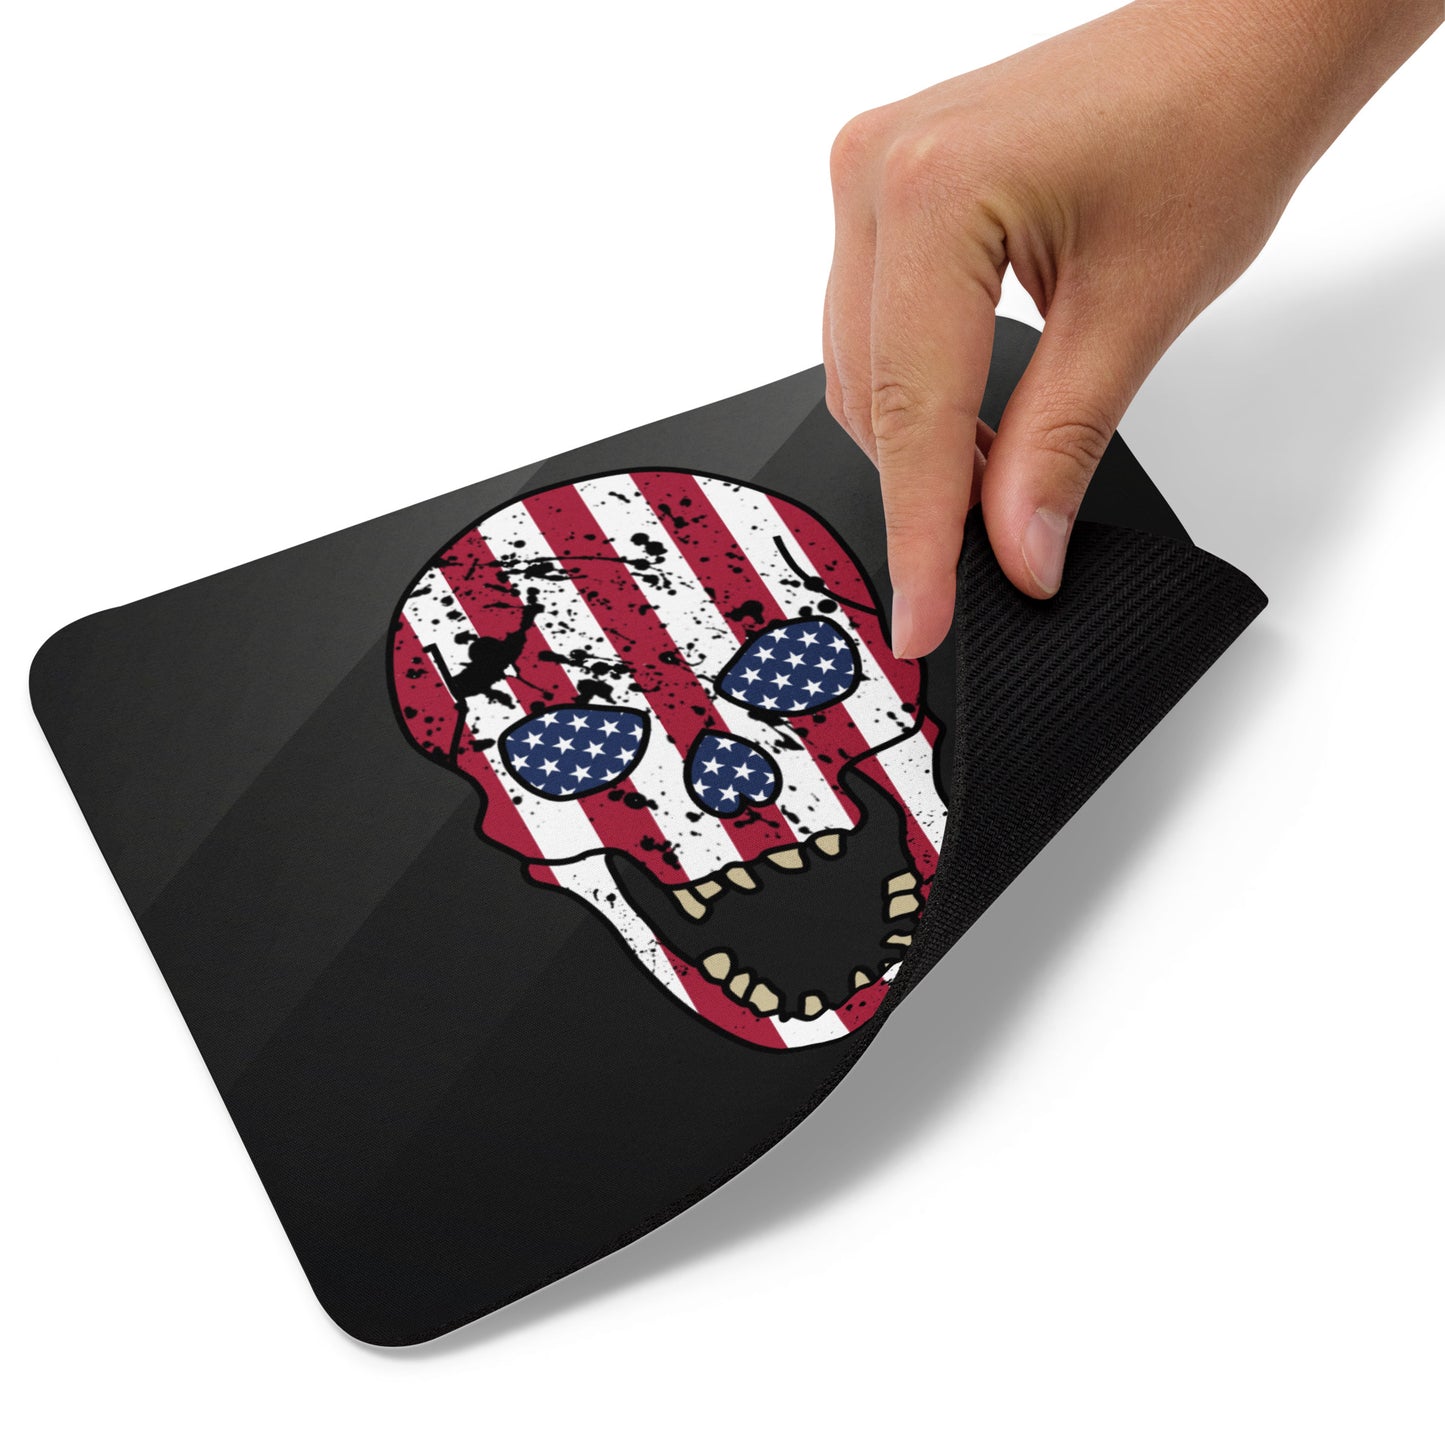 USA Skull Flat Clicker Mousepad - Curled Up From Corner